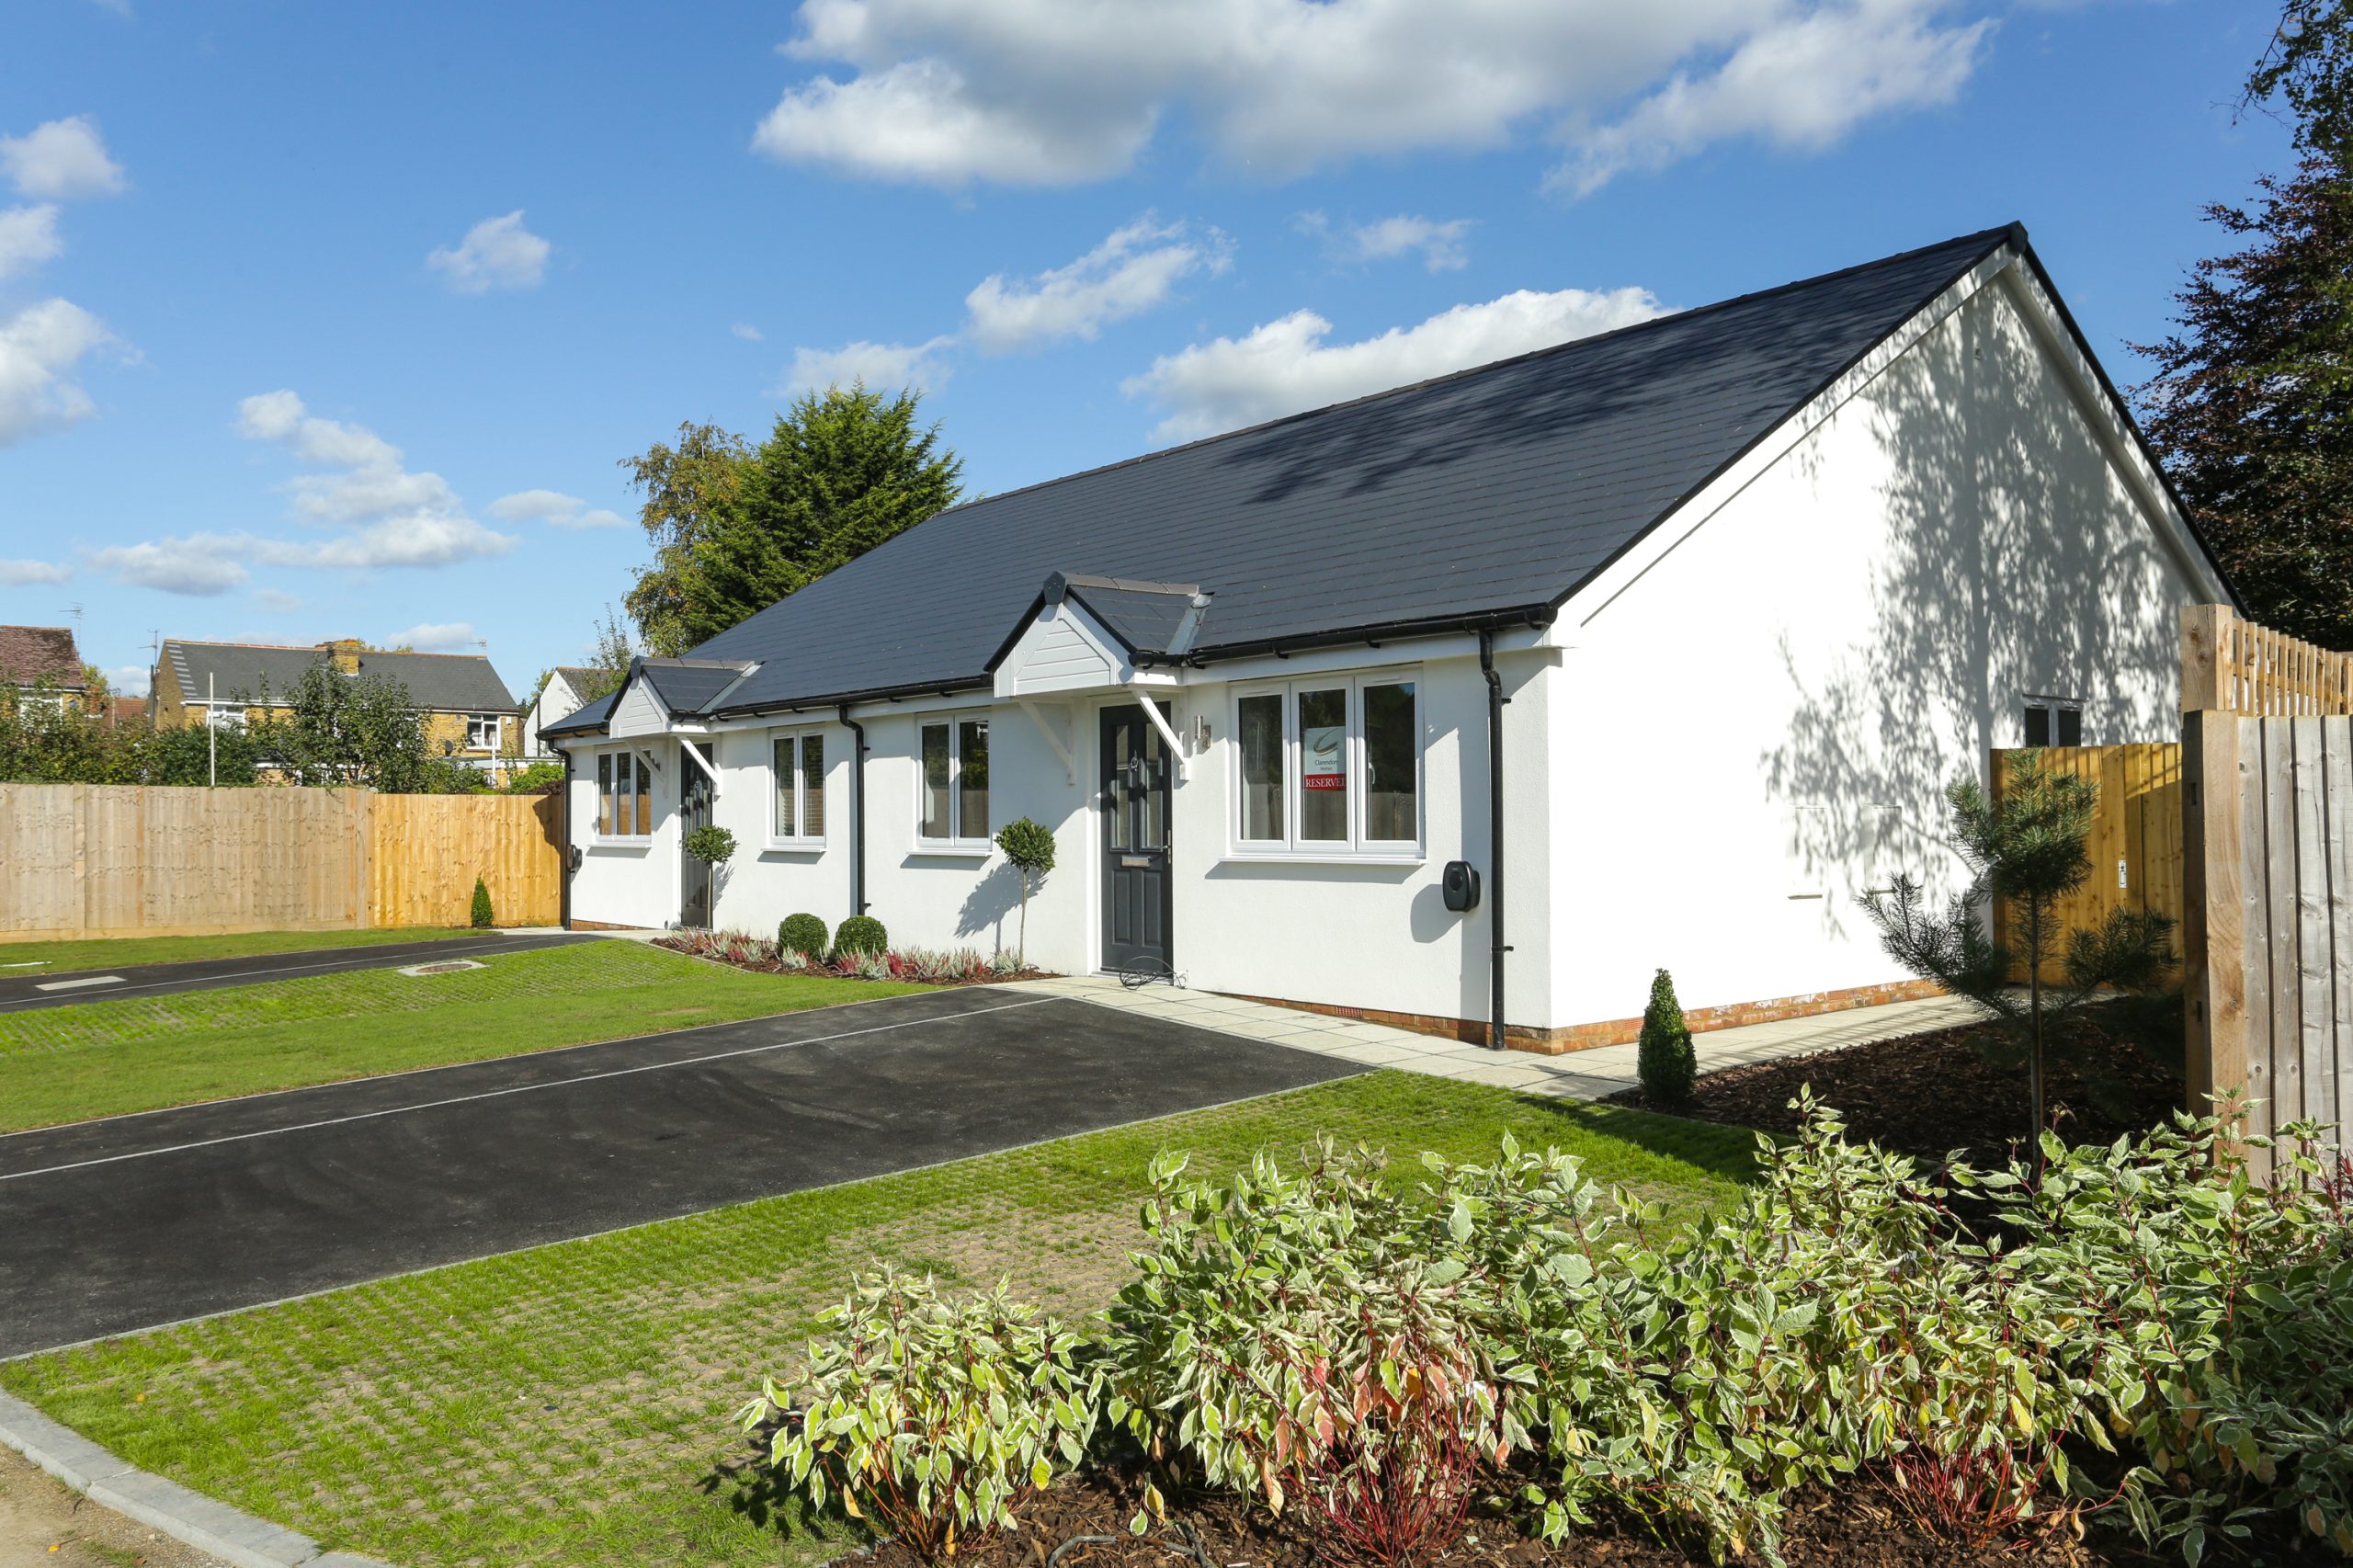 Two new build bungalows at Mulberry Place Phase 2 - side view